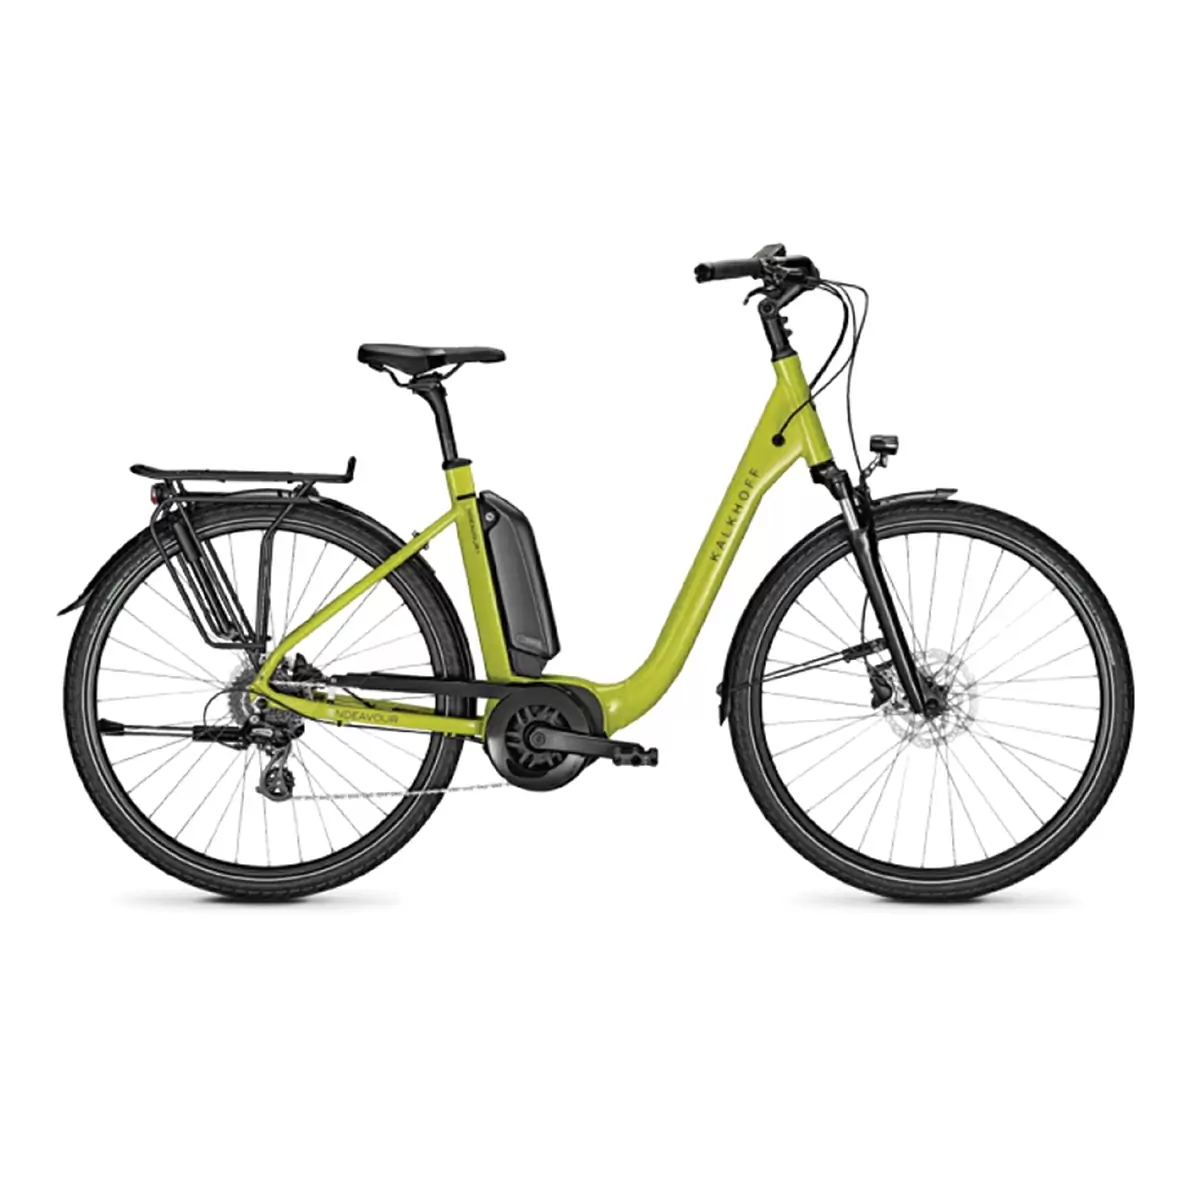 ENDEAVOUR 1.B MOVE 28'' 50mm 8s 400Wh Bosch Wasabi Green 2021 Size S - image